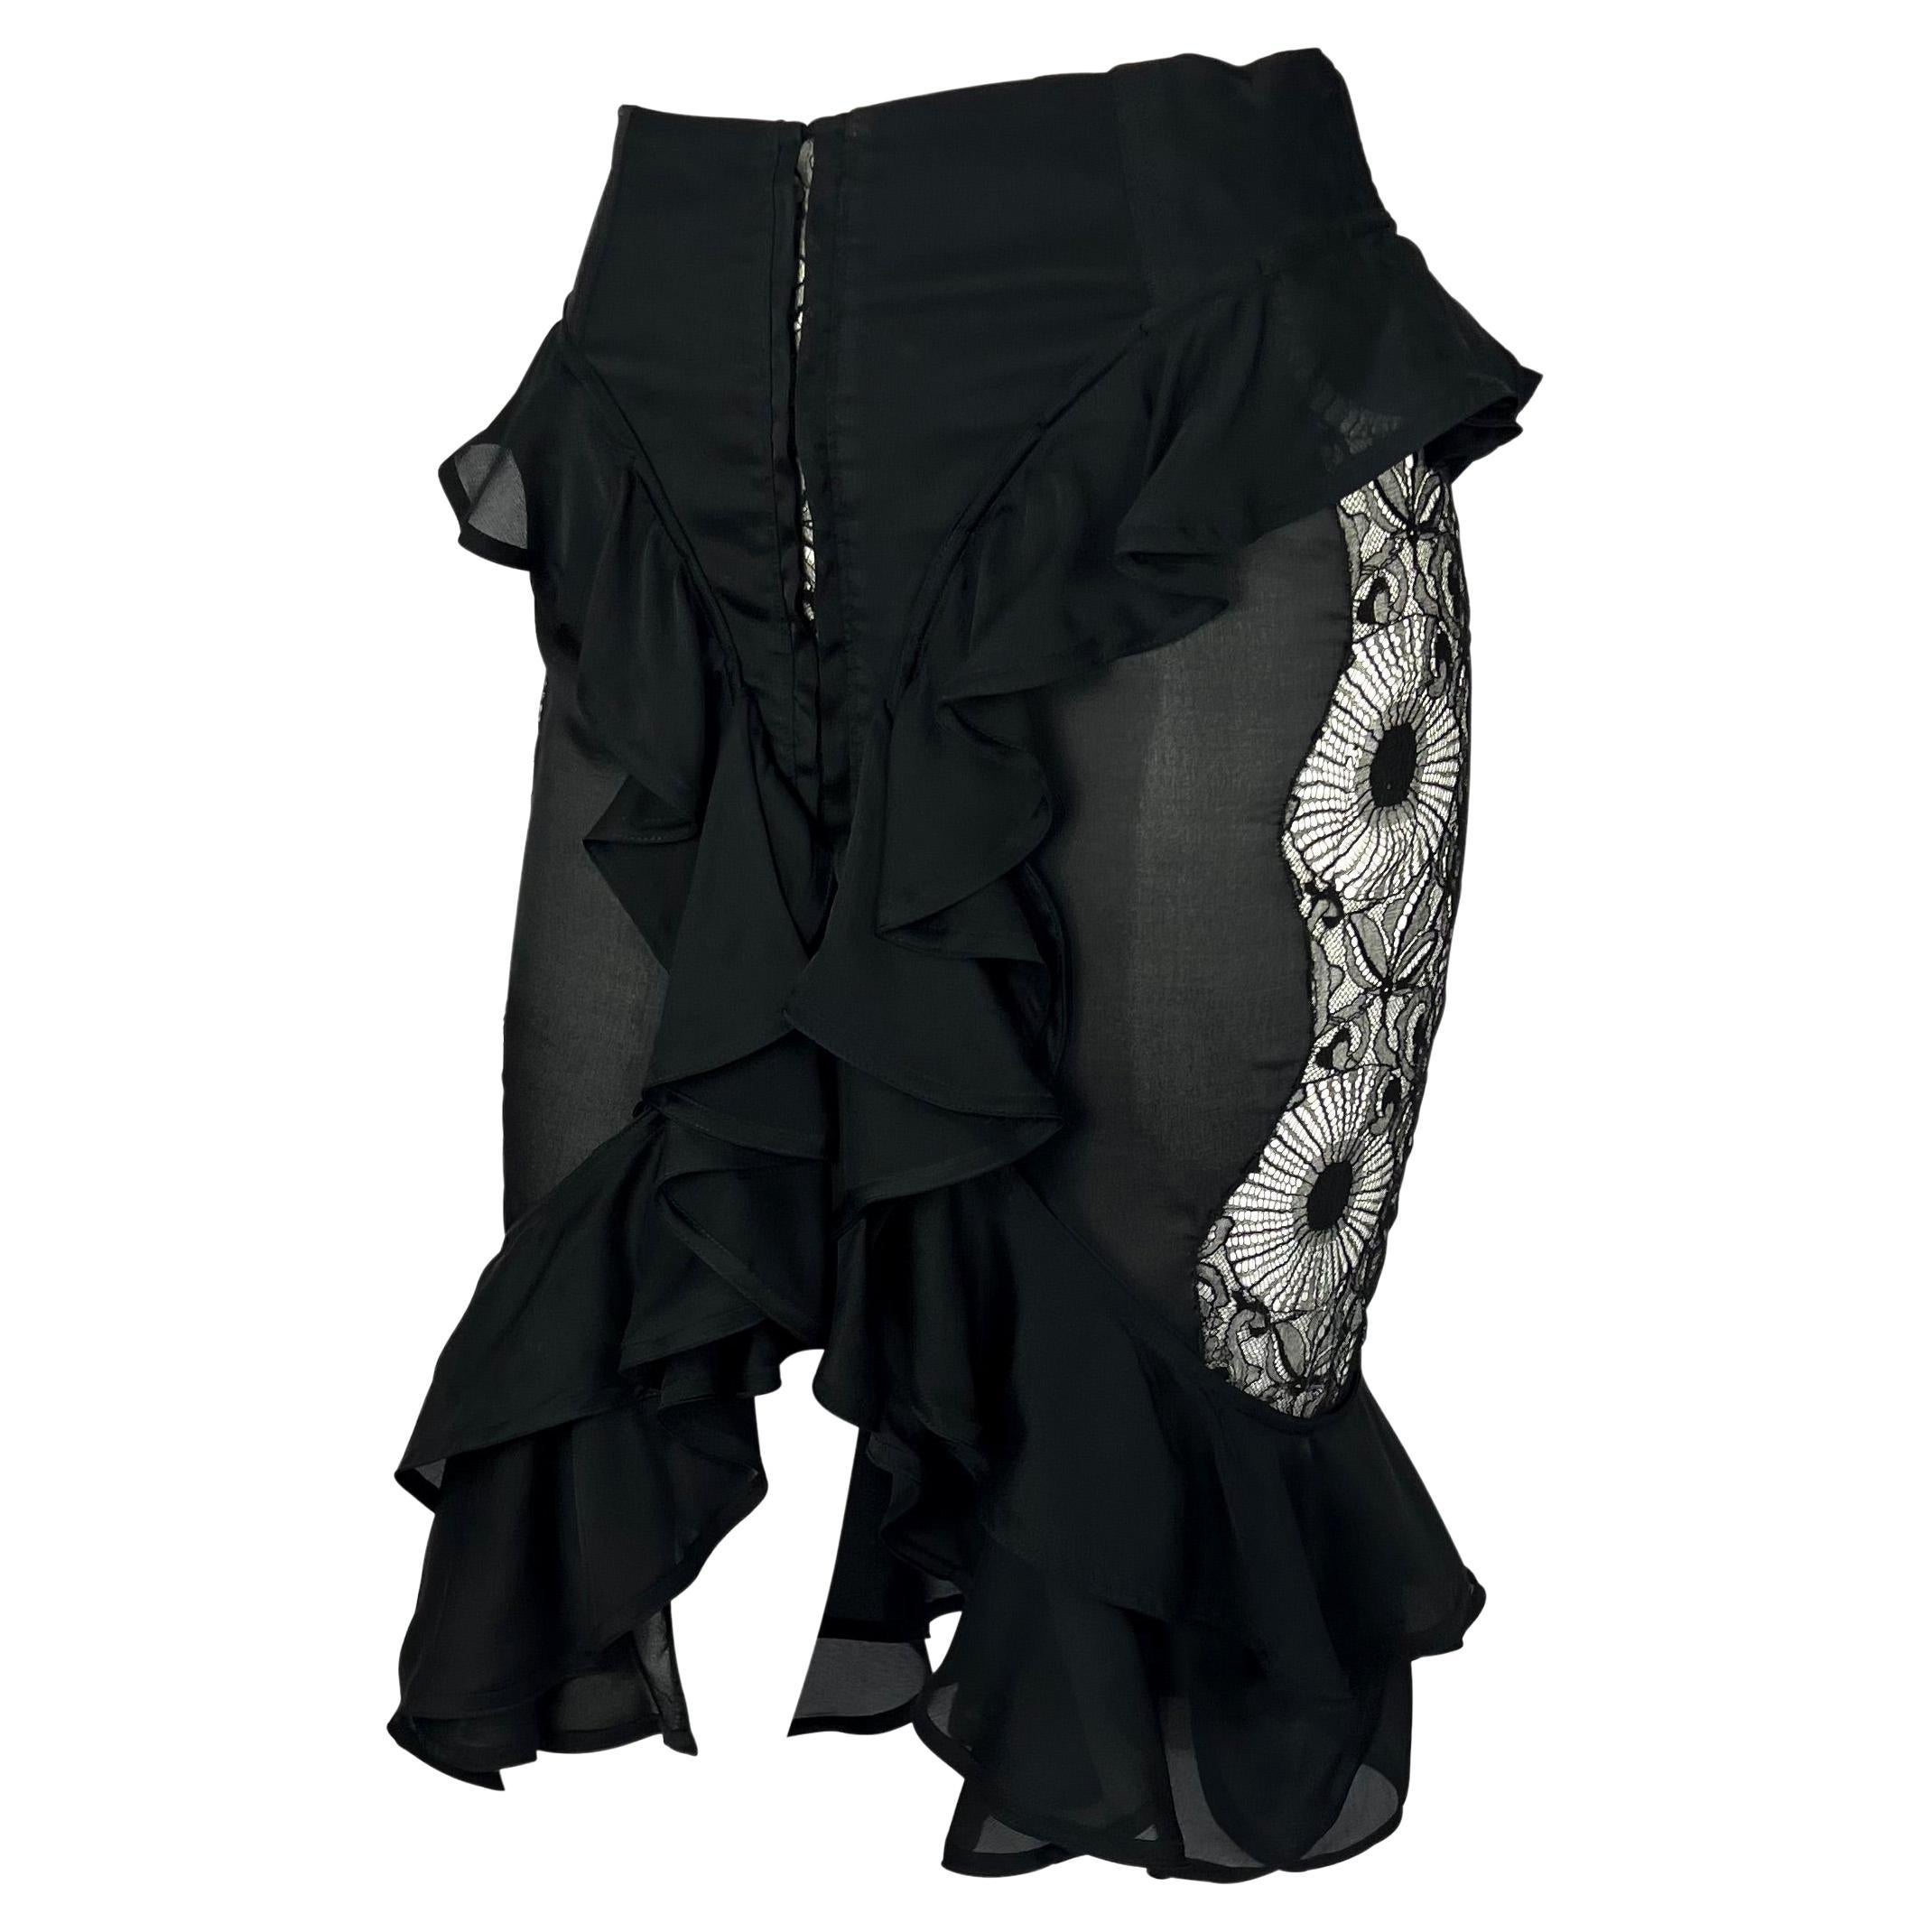 F/W 2003 Yves Saint Laurent by Tom Ford Sheer Lace Satin Ruffled Top Skirt Set For Sale 8